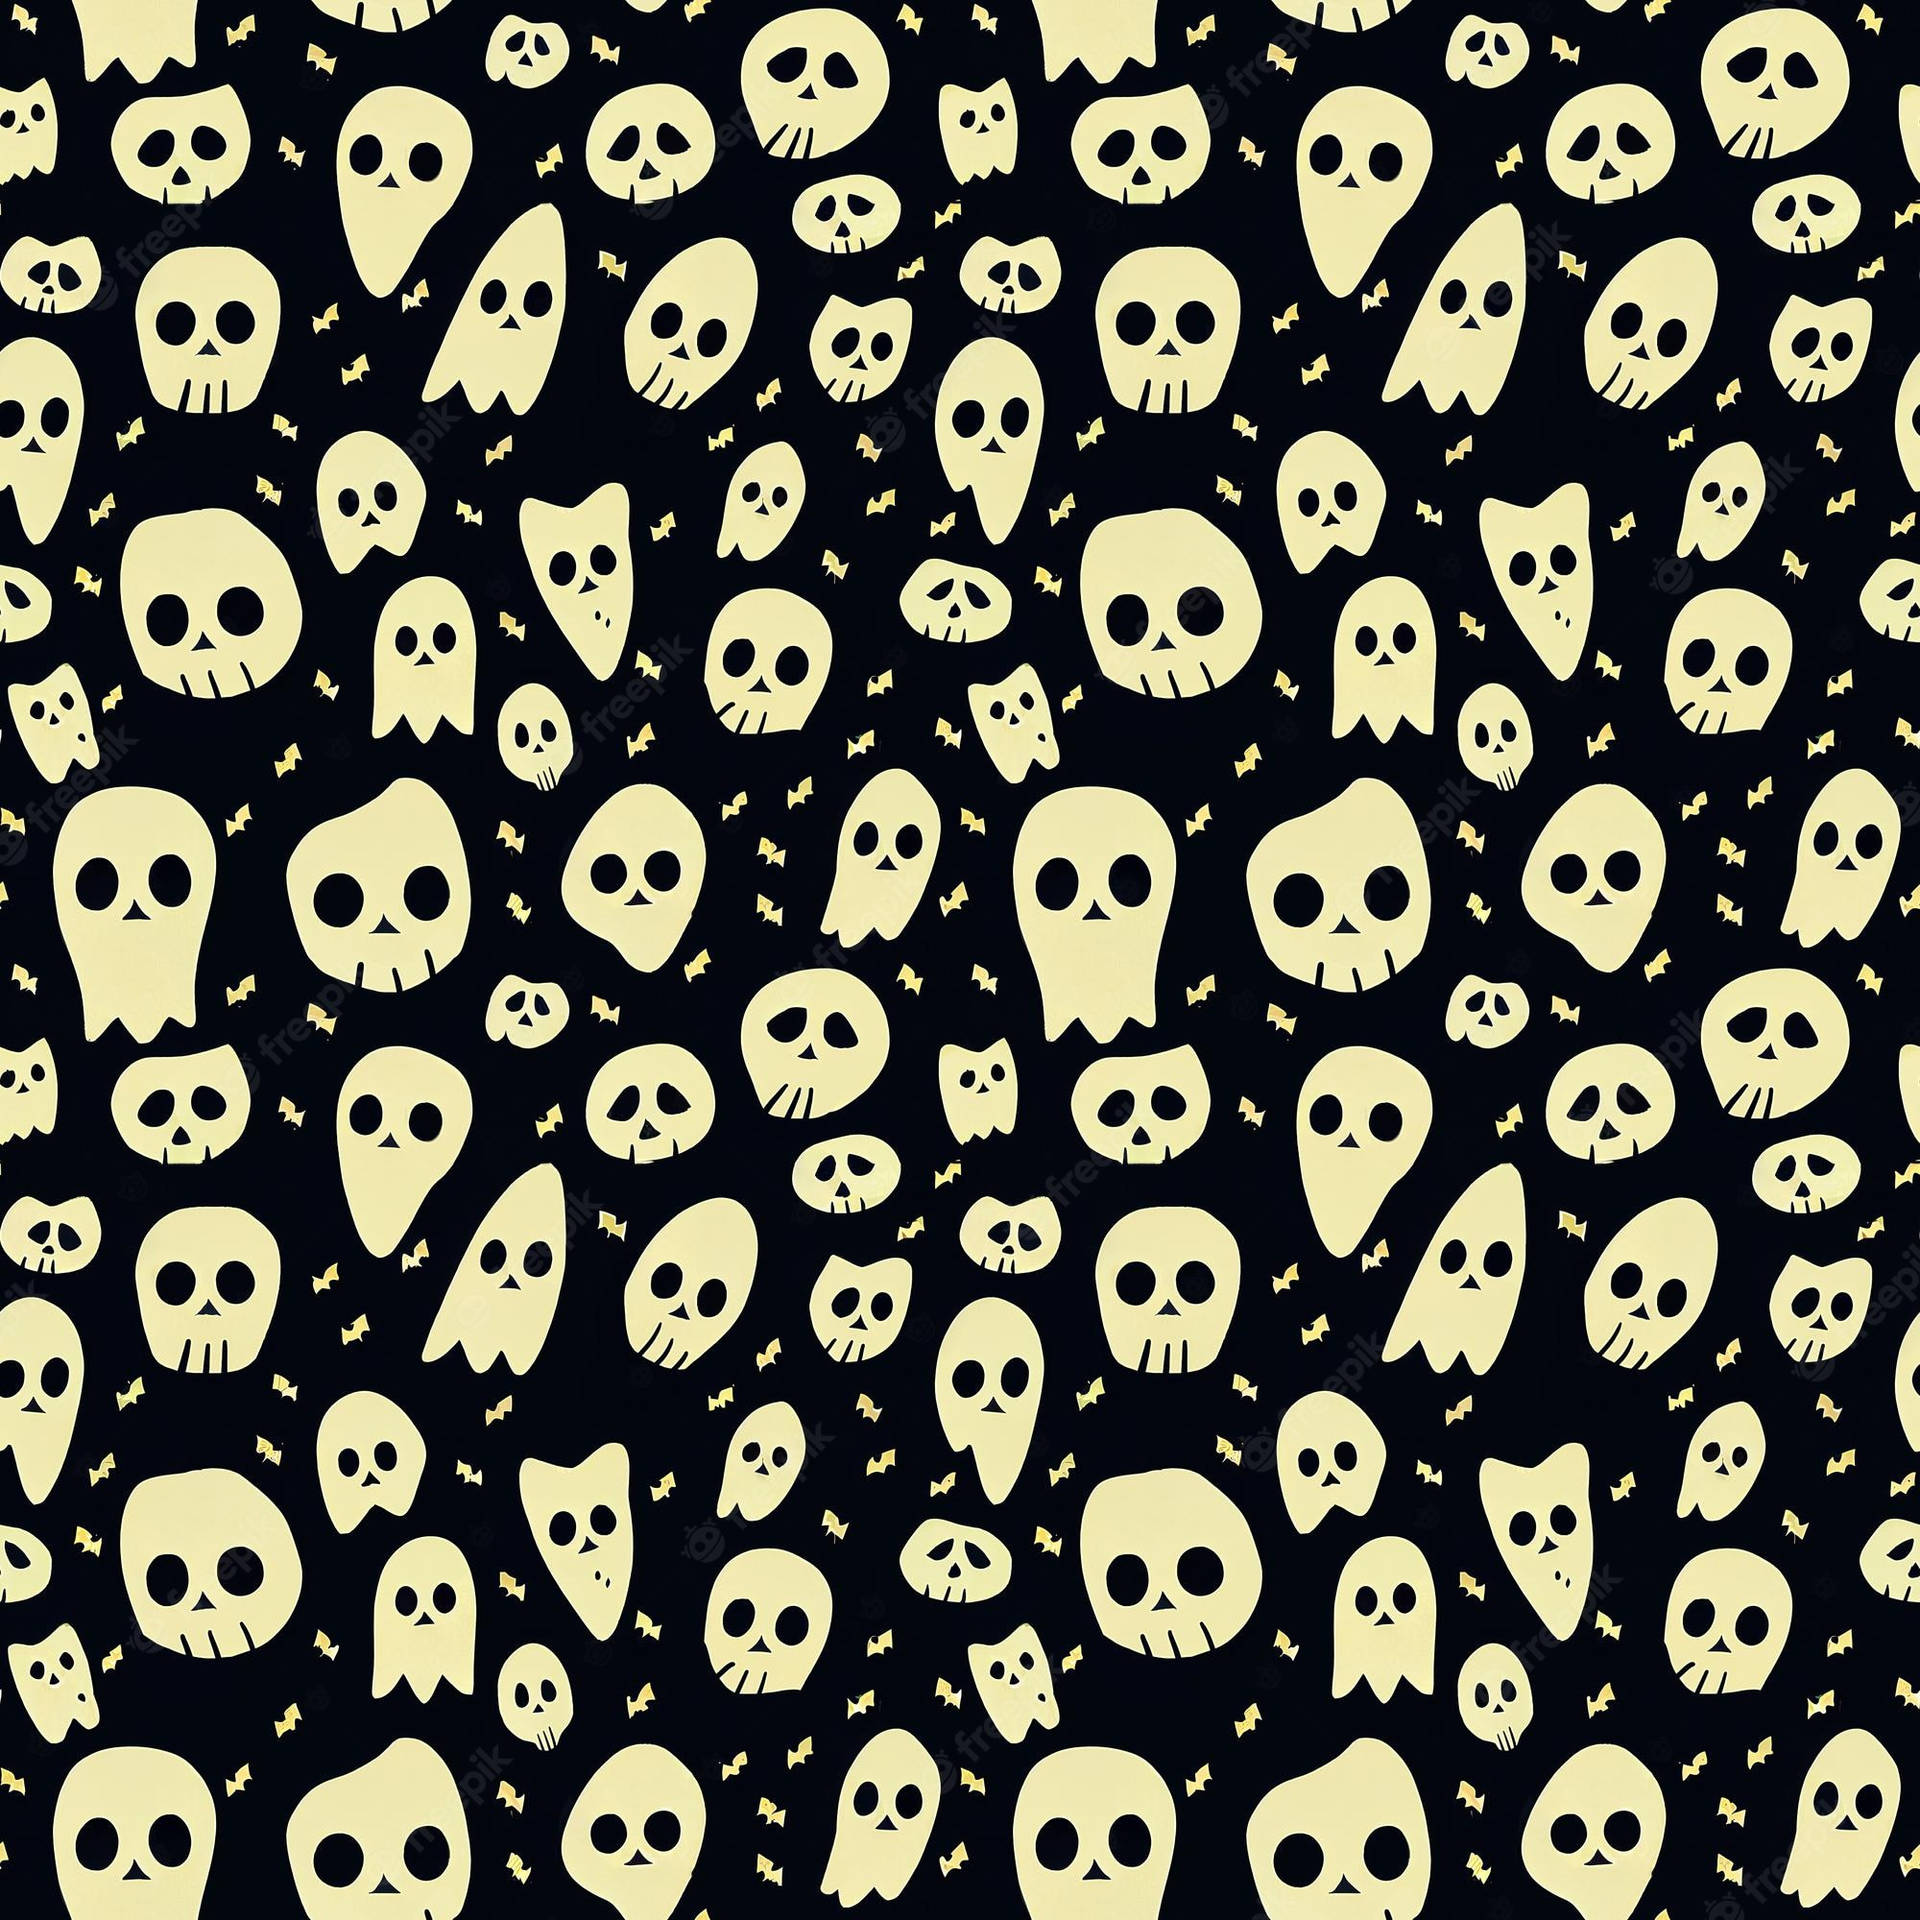 Spooky Aesthetic Differently Shaped Skulls Wallpaper